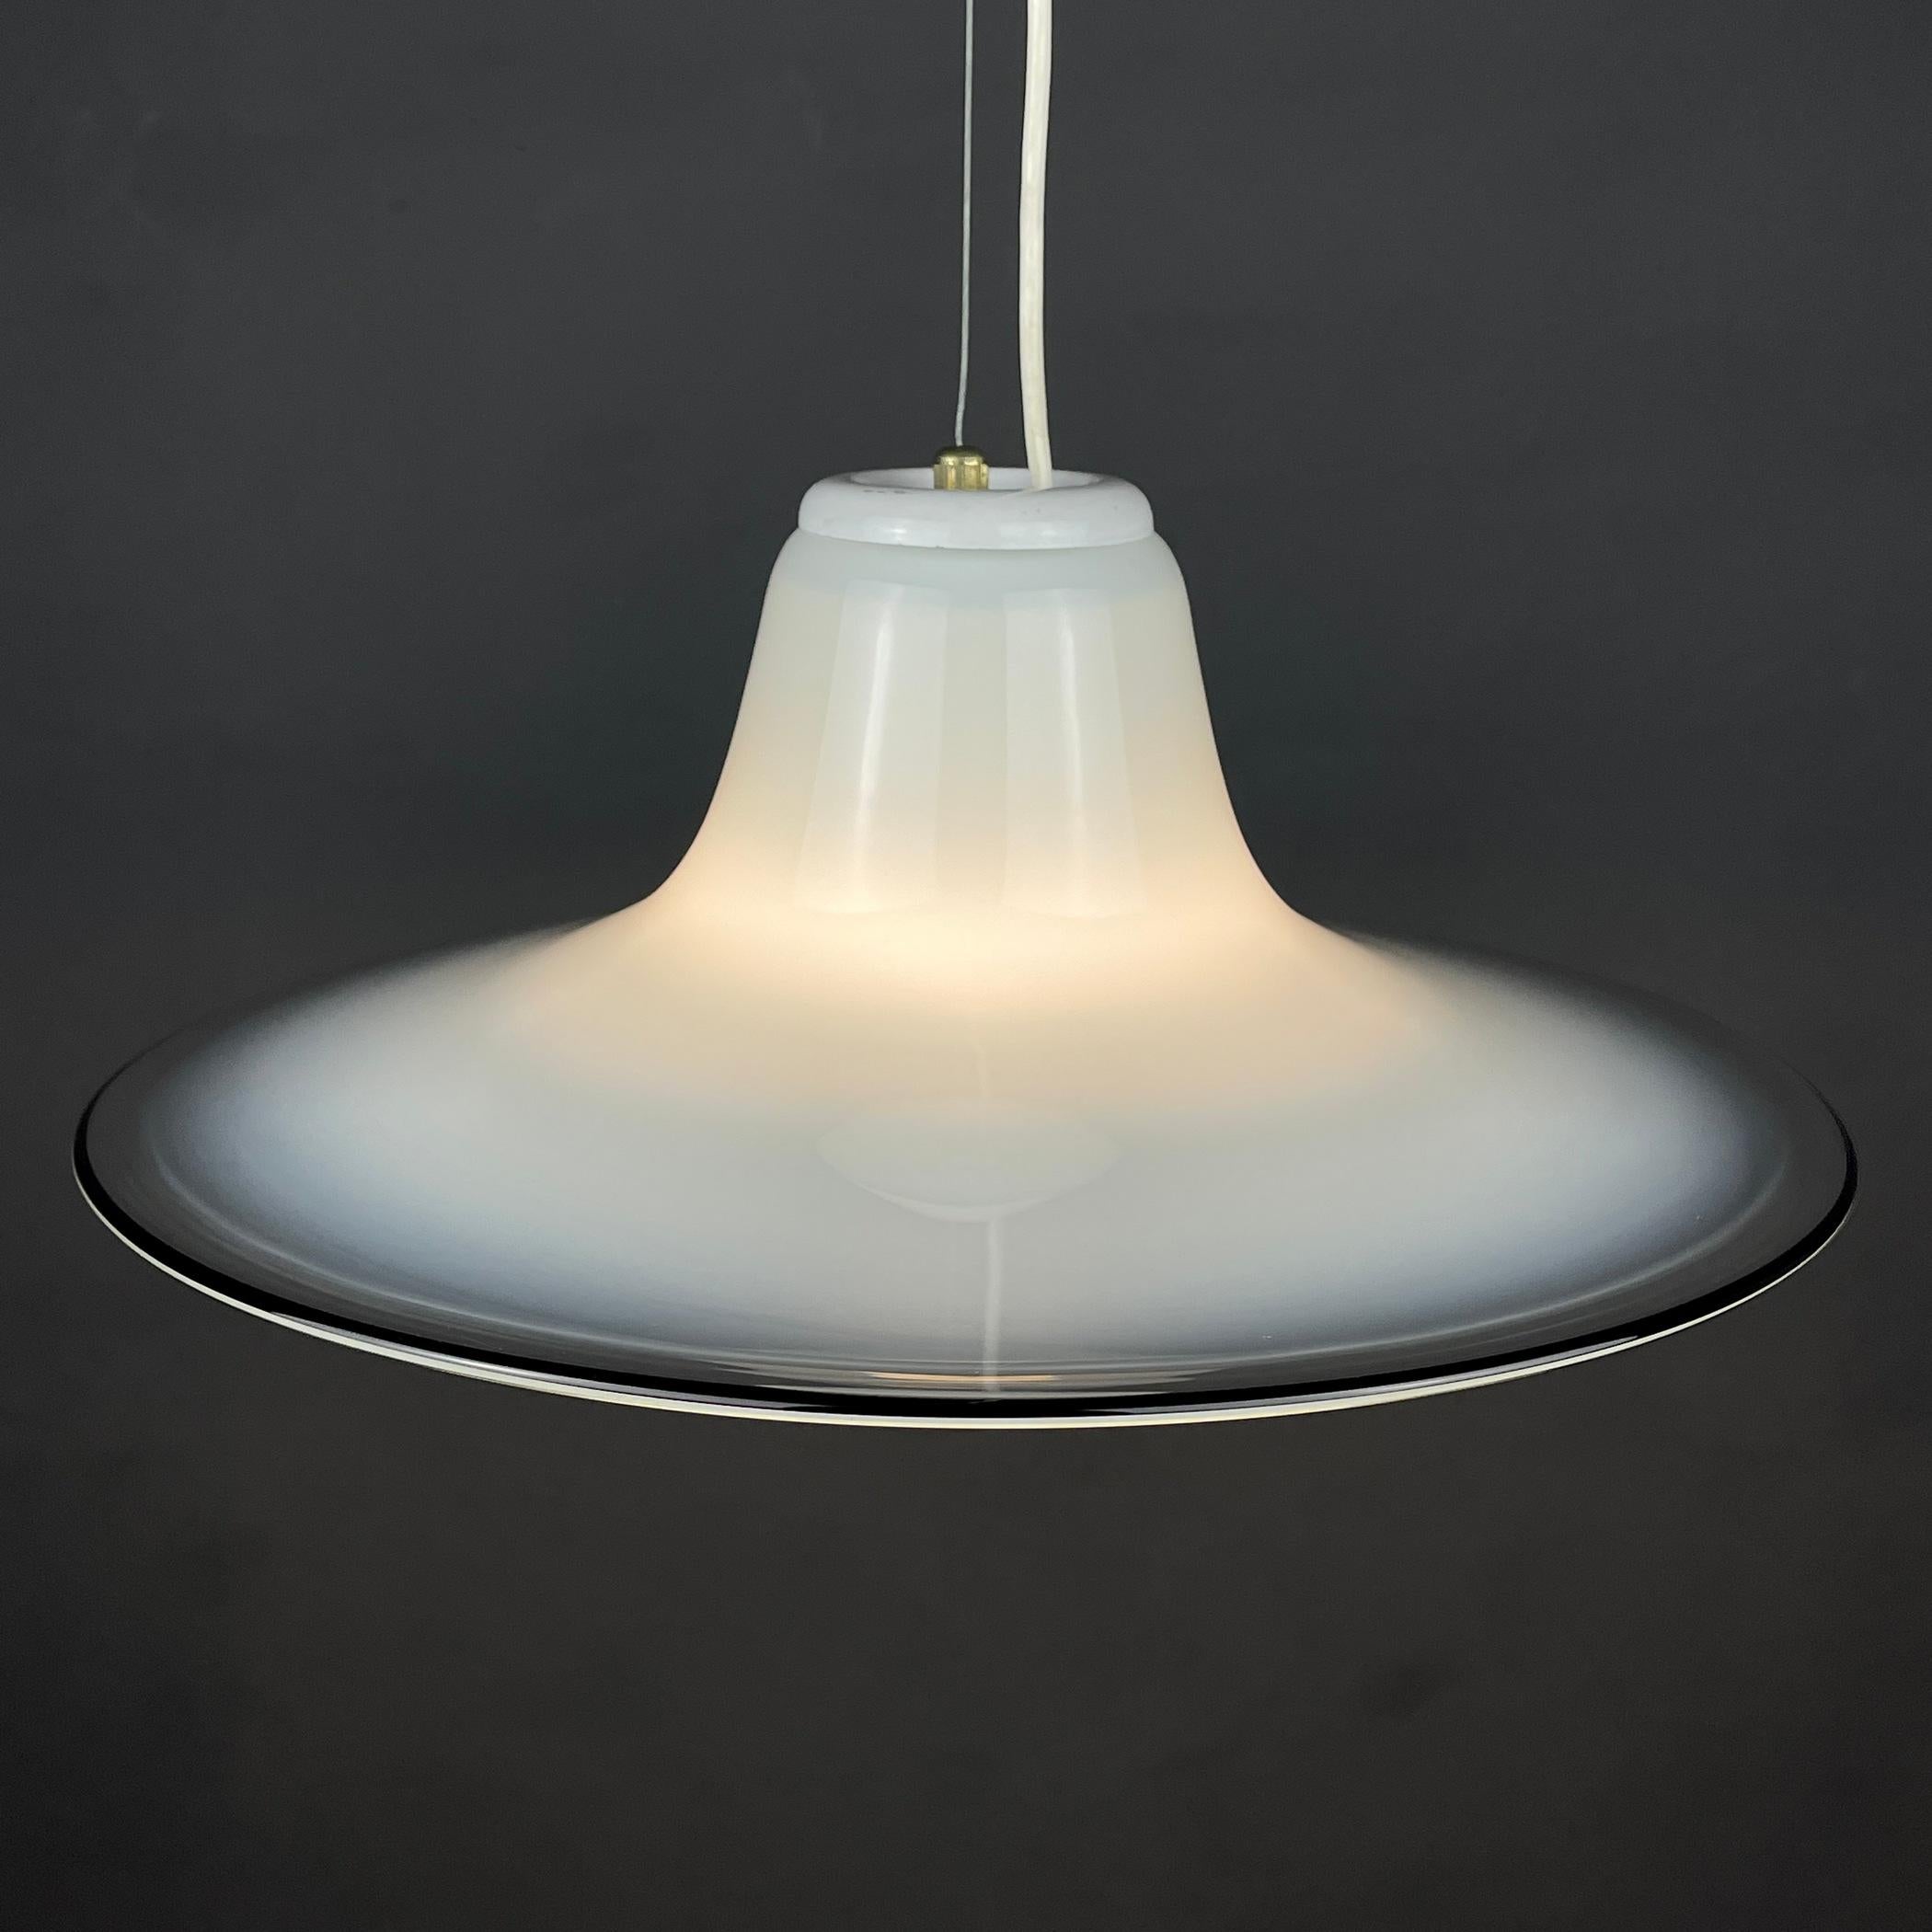 The magnificent Murano glass lamp Cinea by Giusto Toso for Leucos. It was made in the 1970s in Italy. Lampshade in the shape of a witch's hat in hand-blown crystal Murano glass. Smooth transition from transparent to white. Leucos was founded in 1962